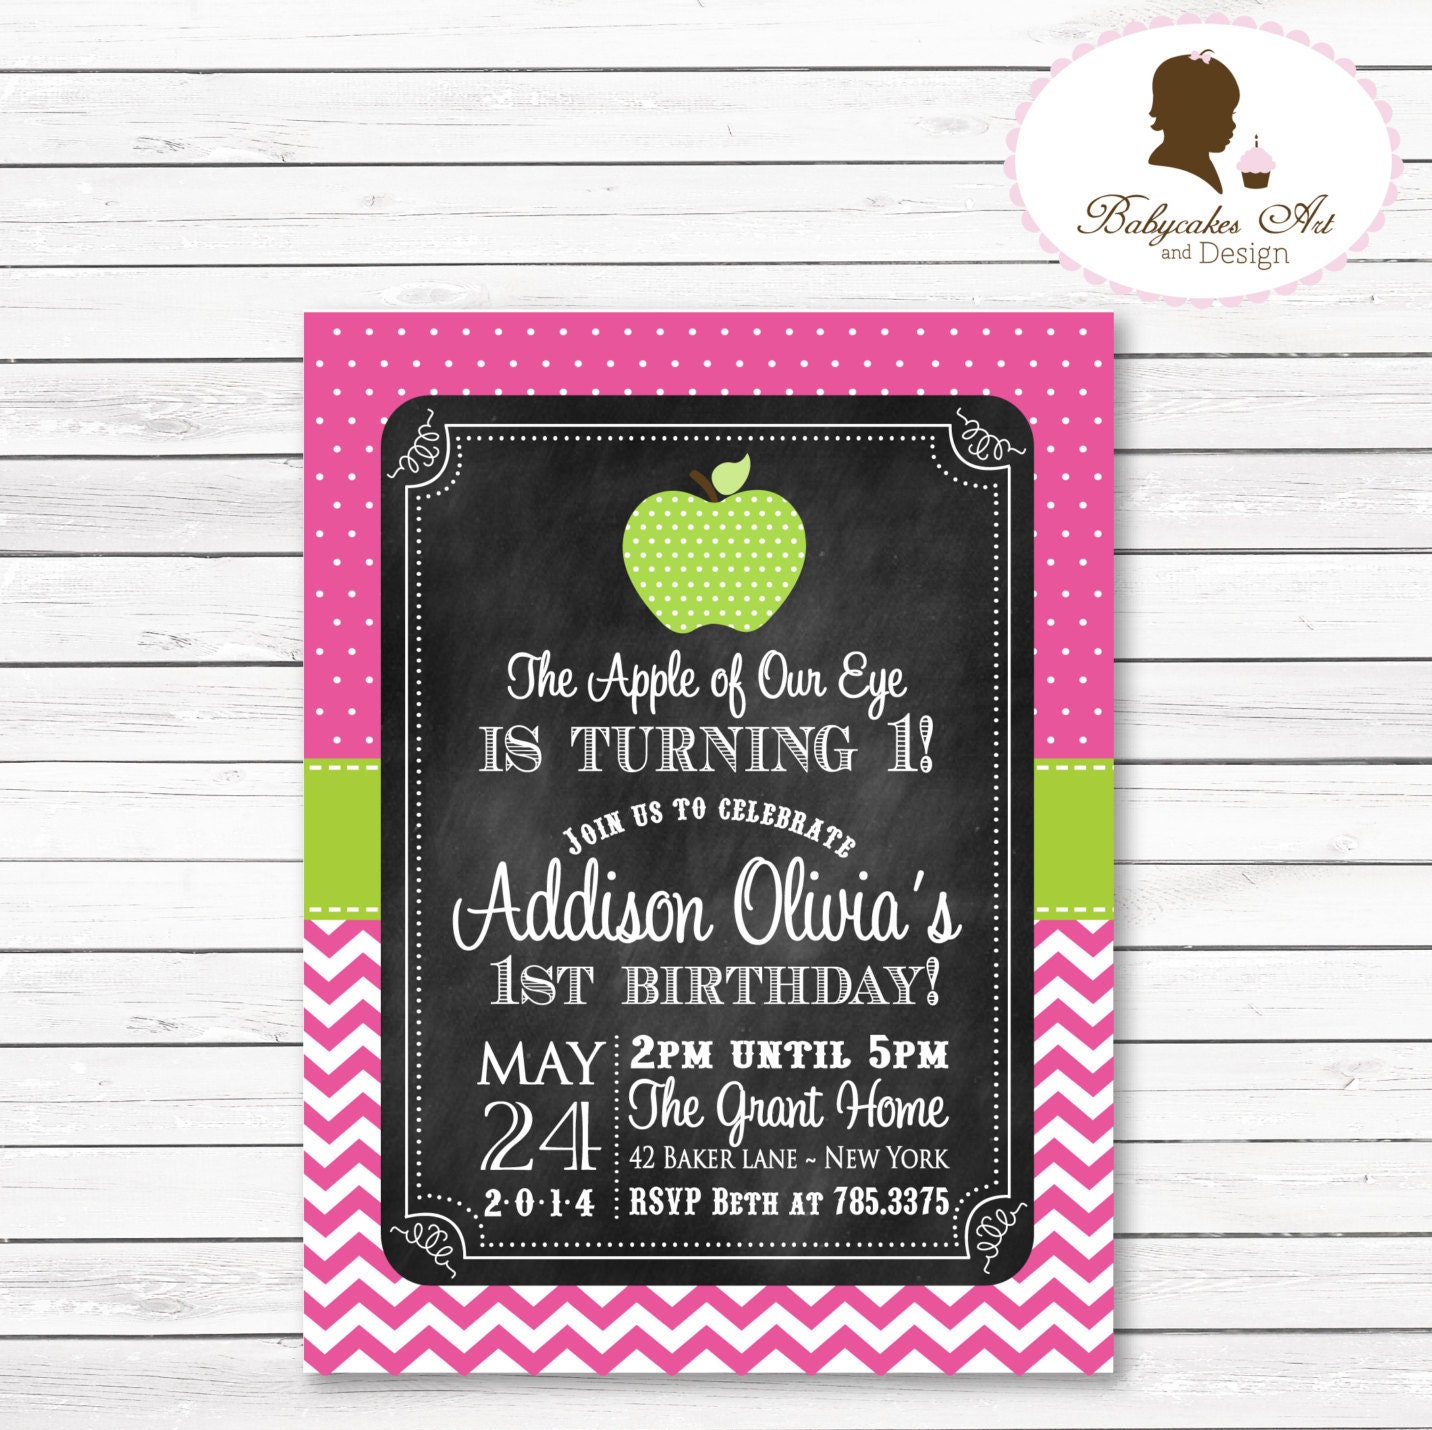 DIY Apple of Our Eye Invitation The Apple of Our by BabycakesArt